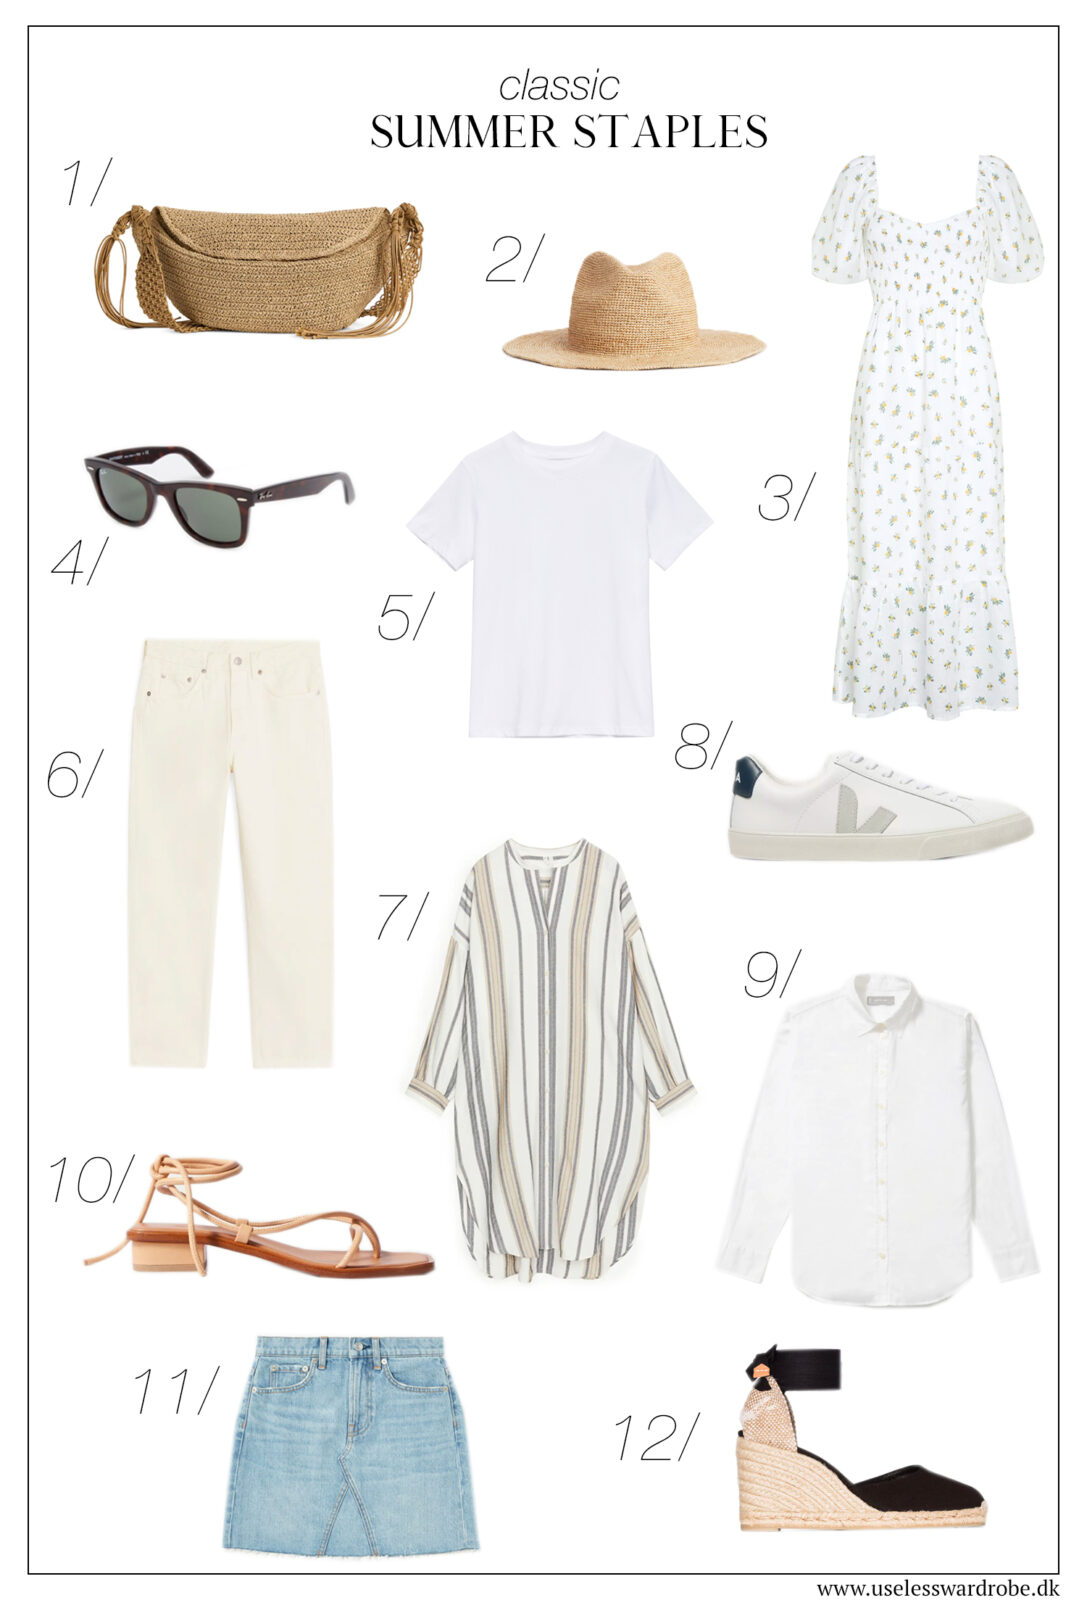 12 classic summer staples to invest in | Use less